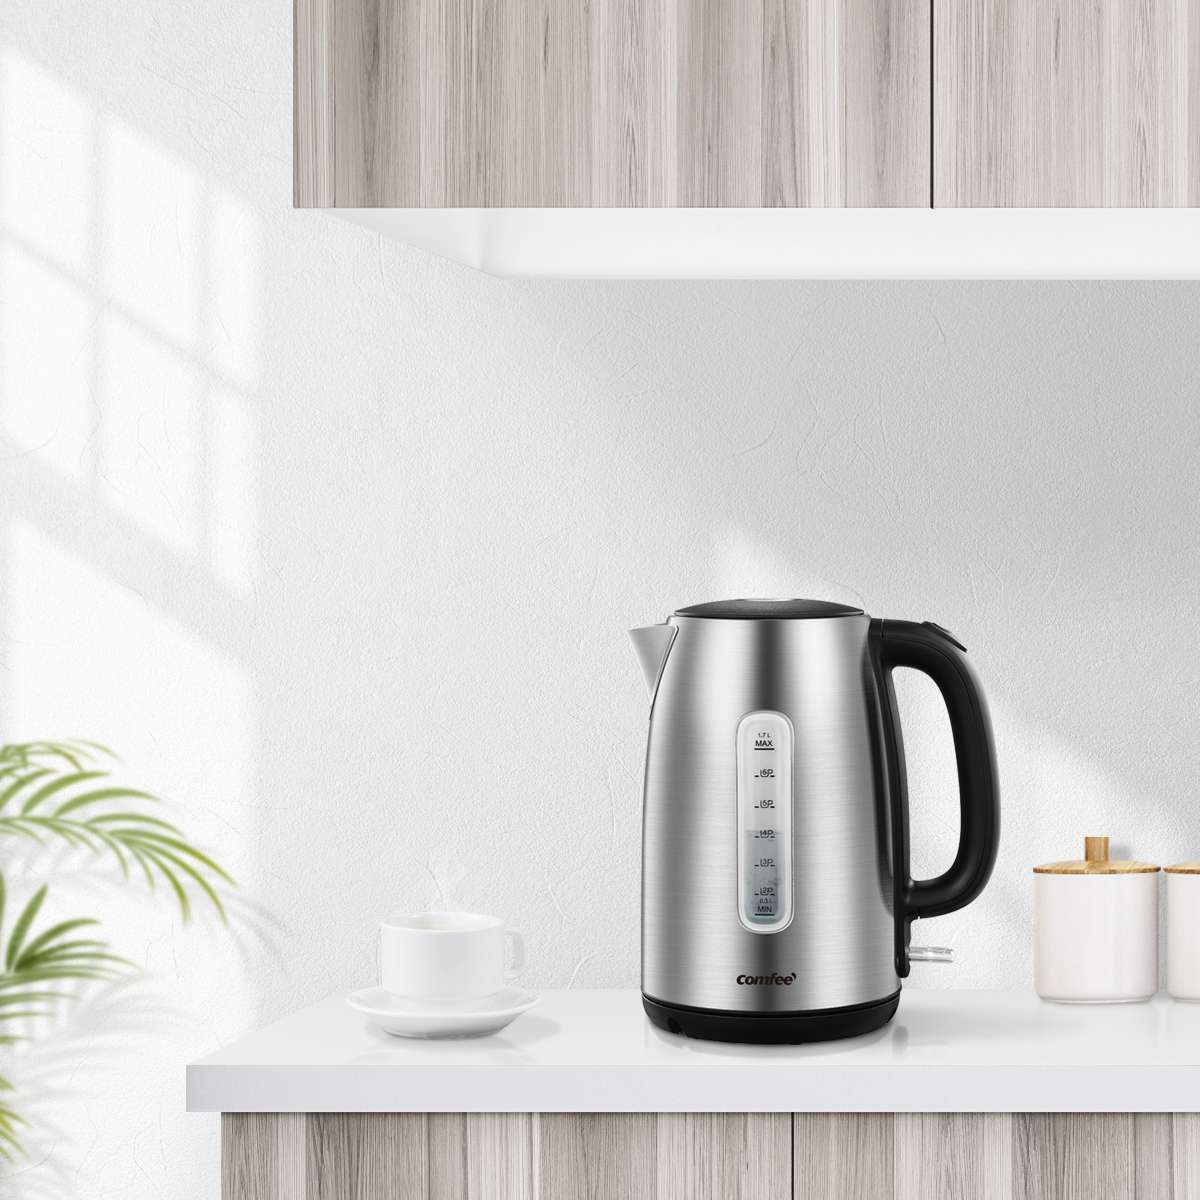 STAY by Cuisinart Cordless Electric Kettle - Stainless